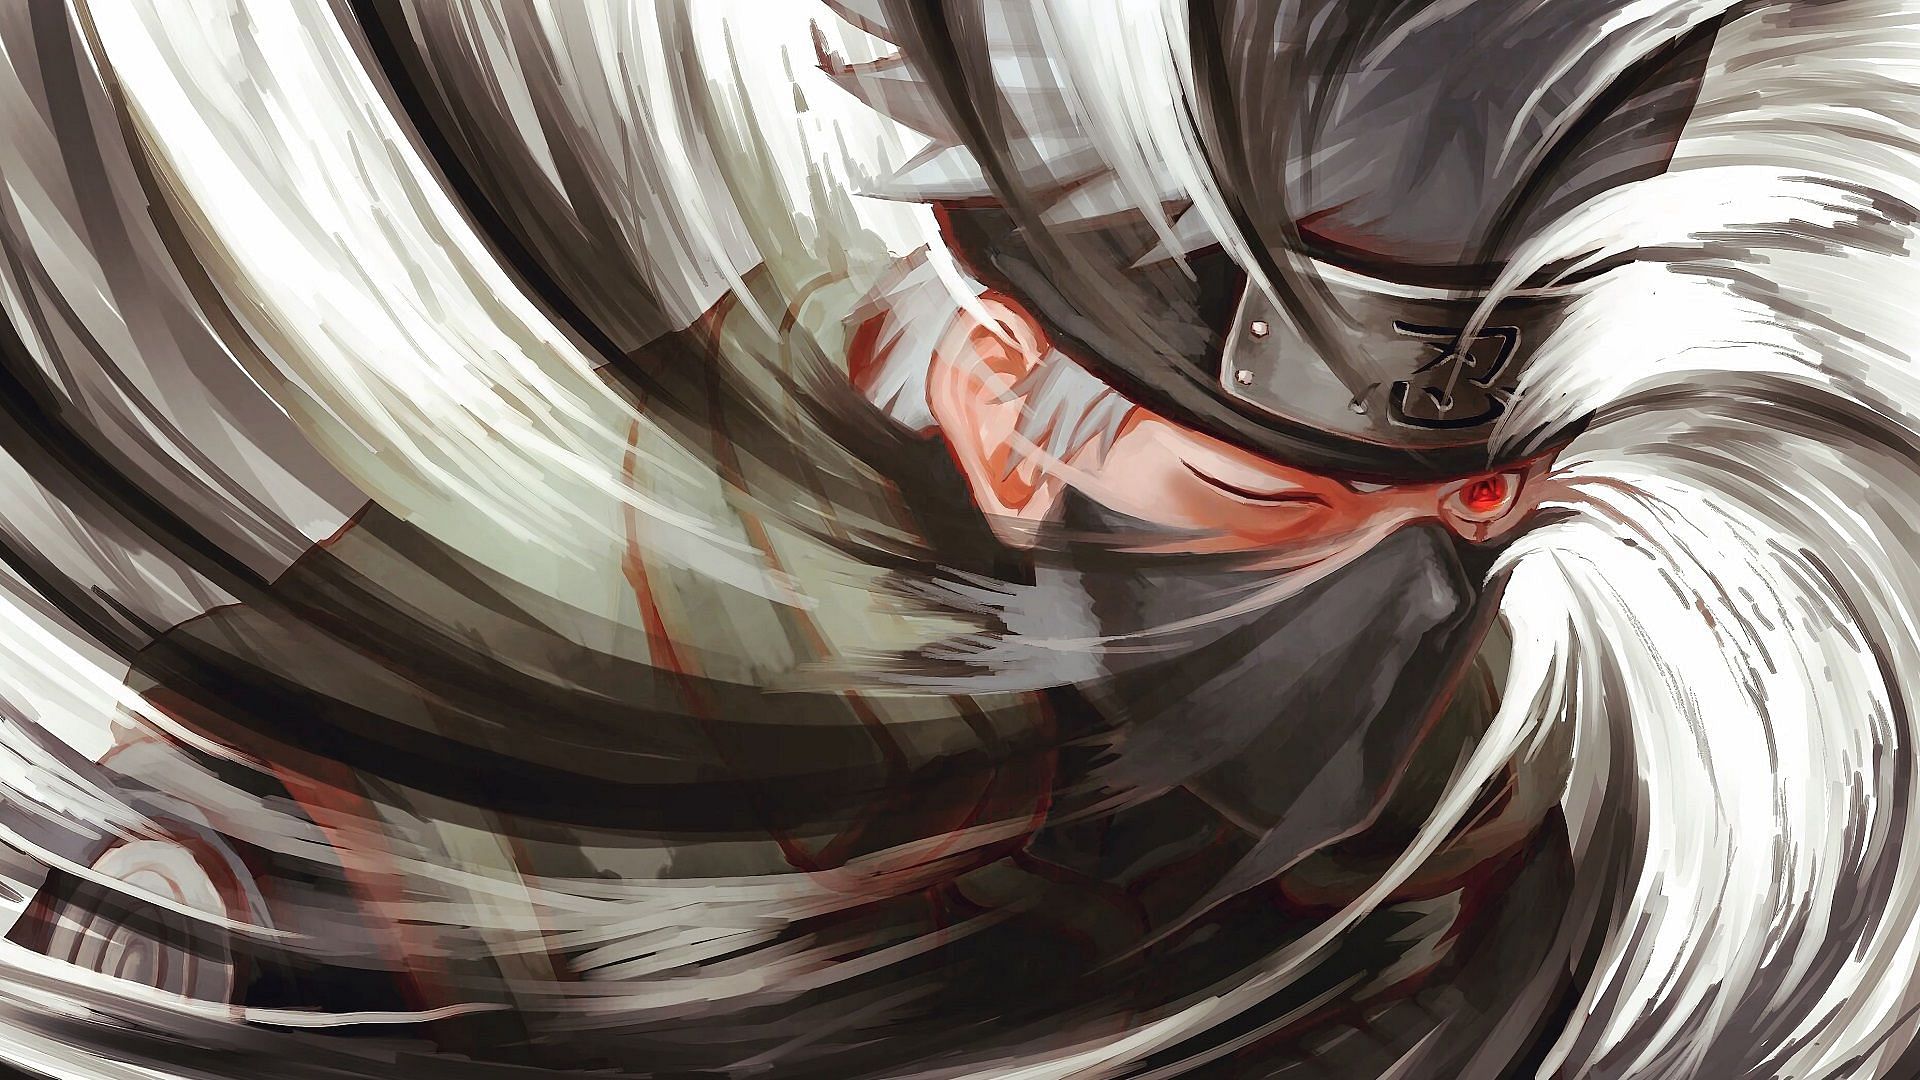 With Kamui, Kakashi could warp away anything in an instant (Image via Studio Pierrot, Naruto)